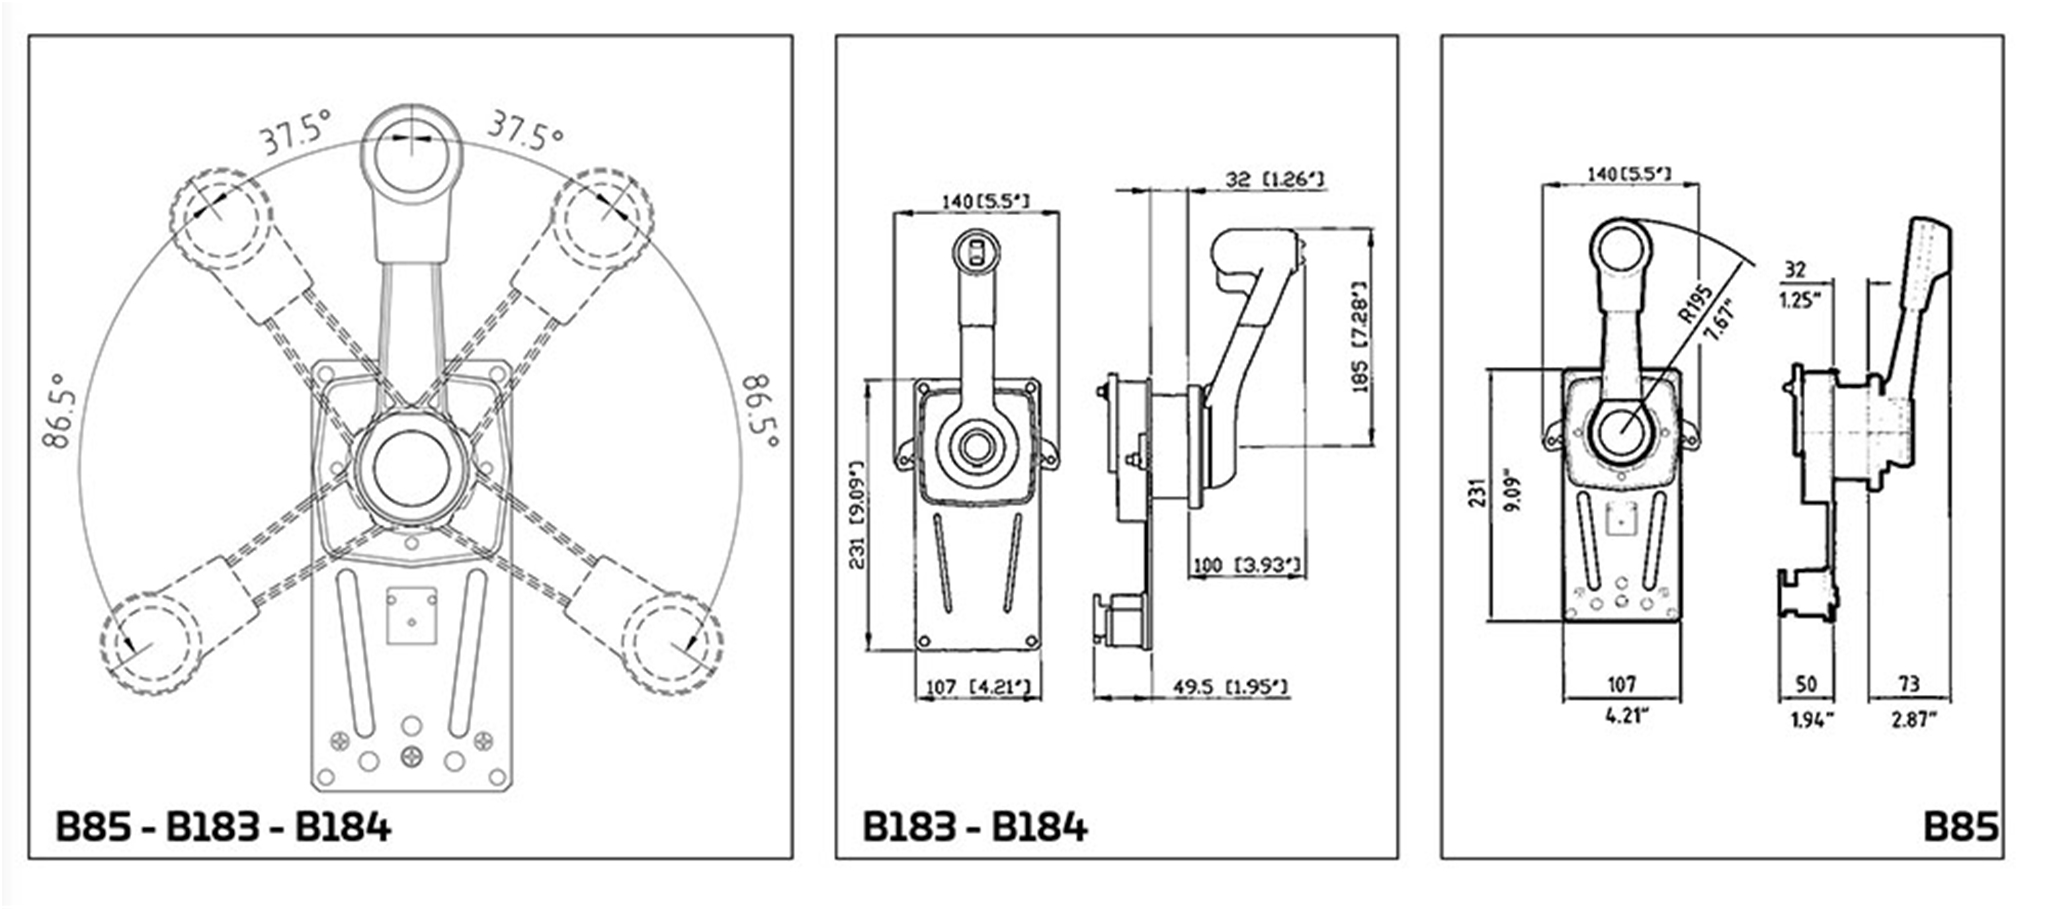 B85 35682 I Single Lever Side Mount Controls Specifications